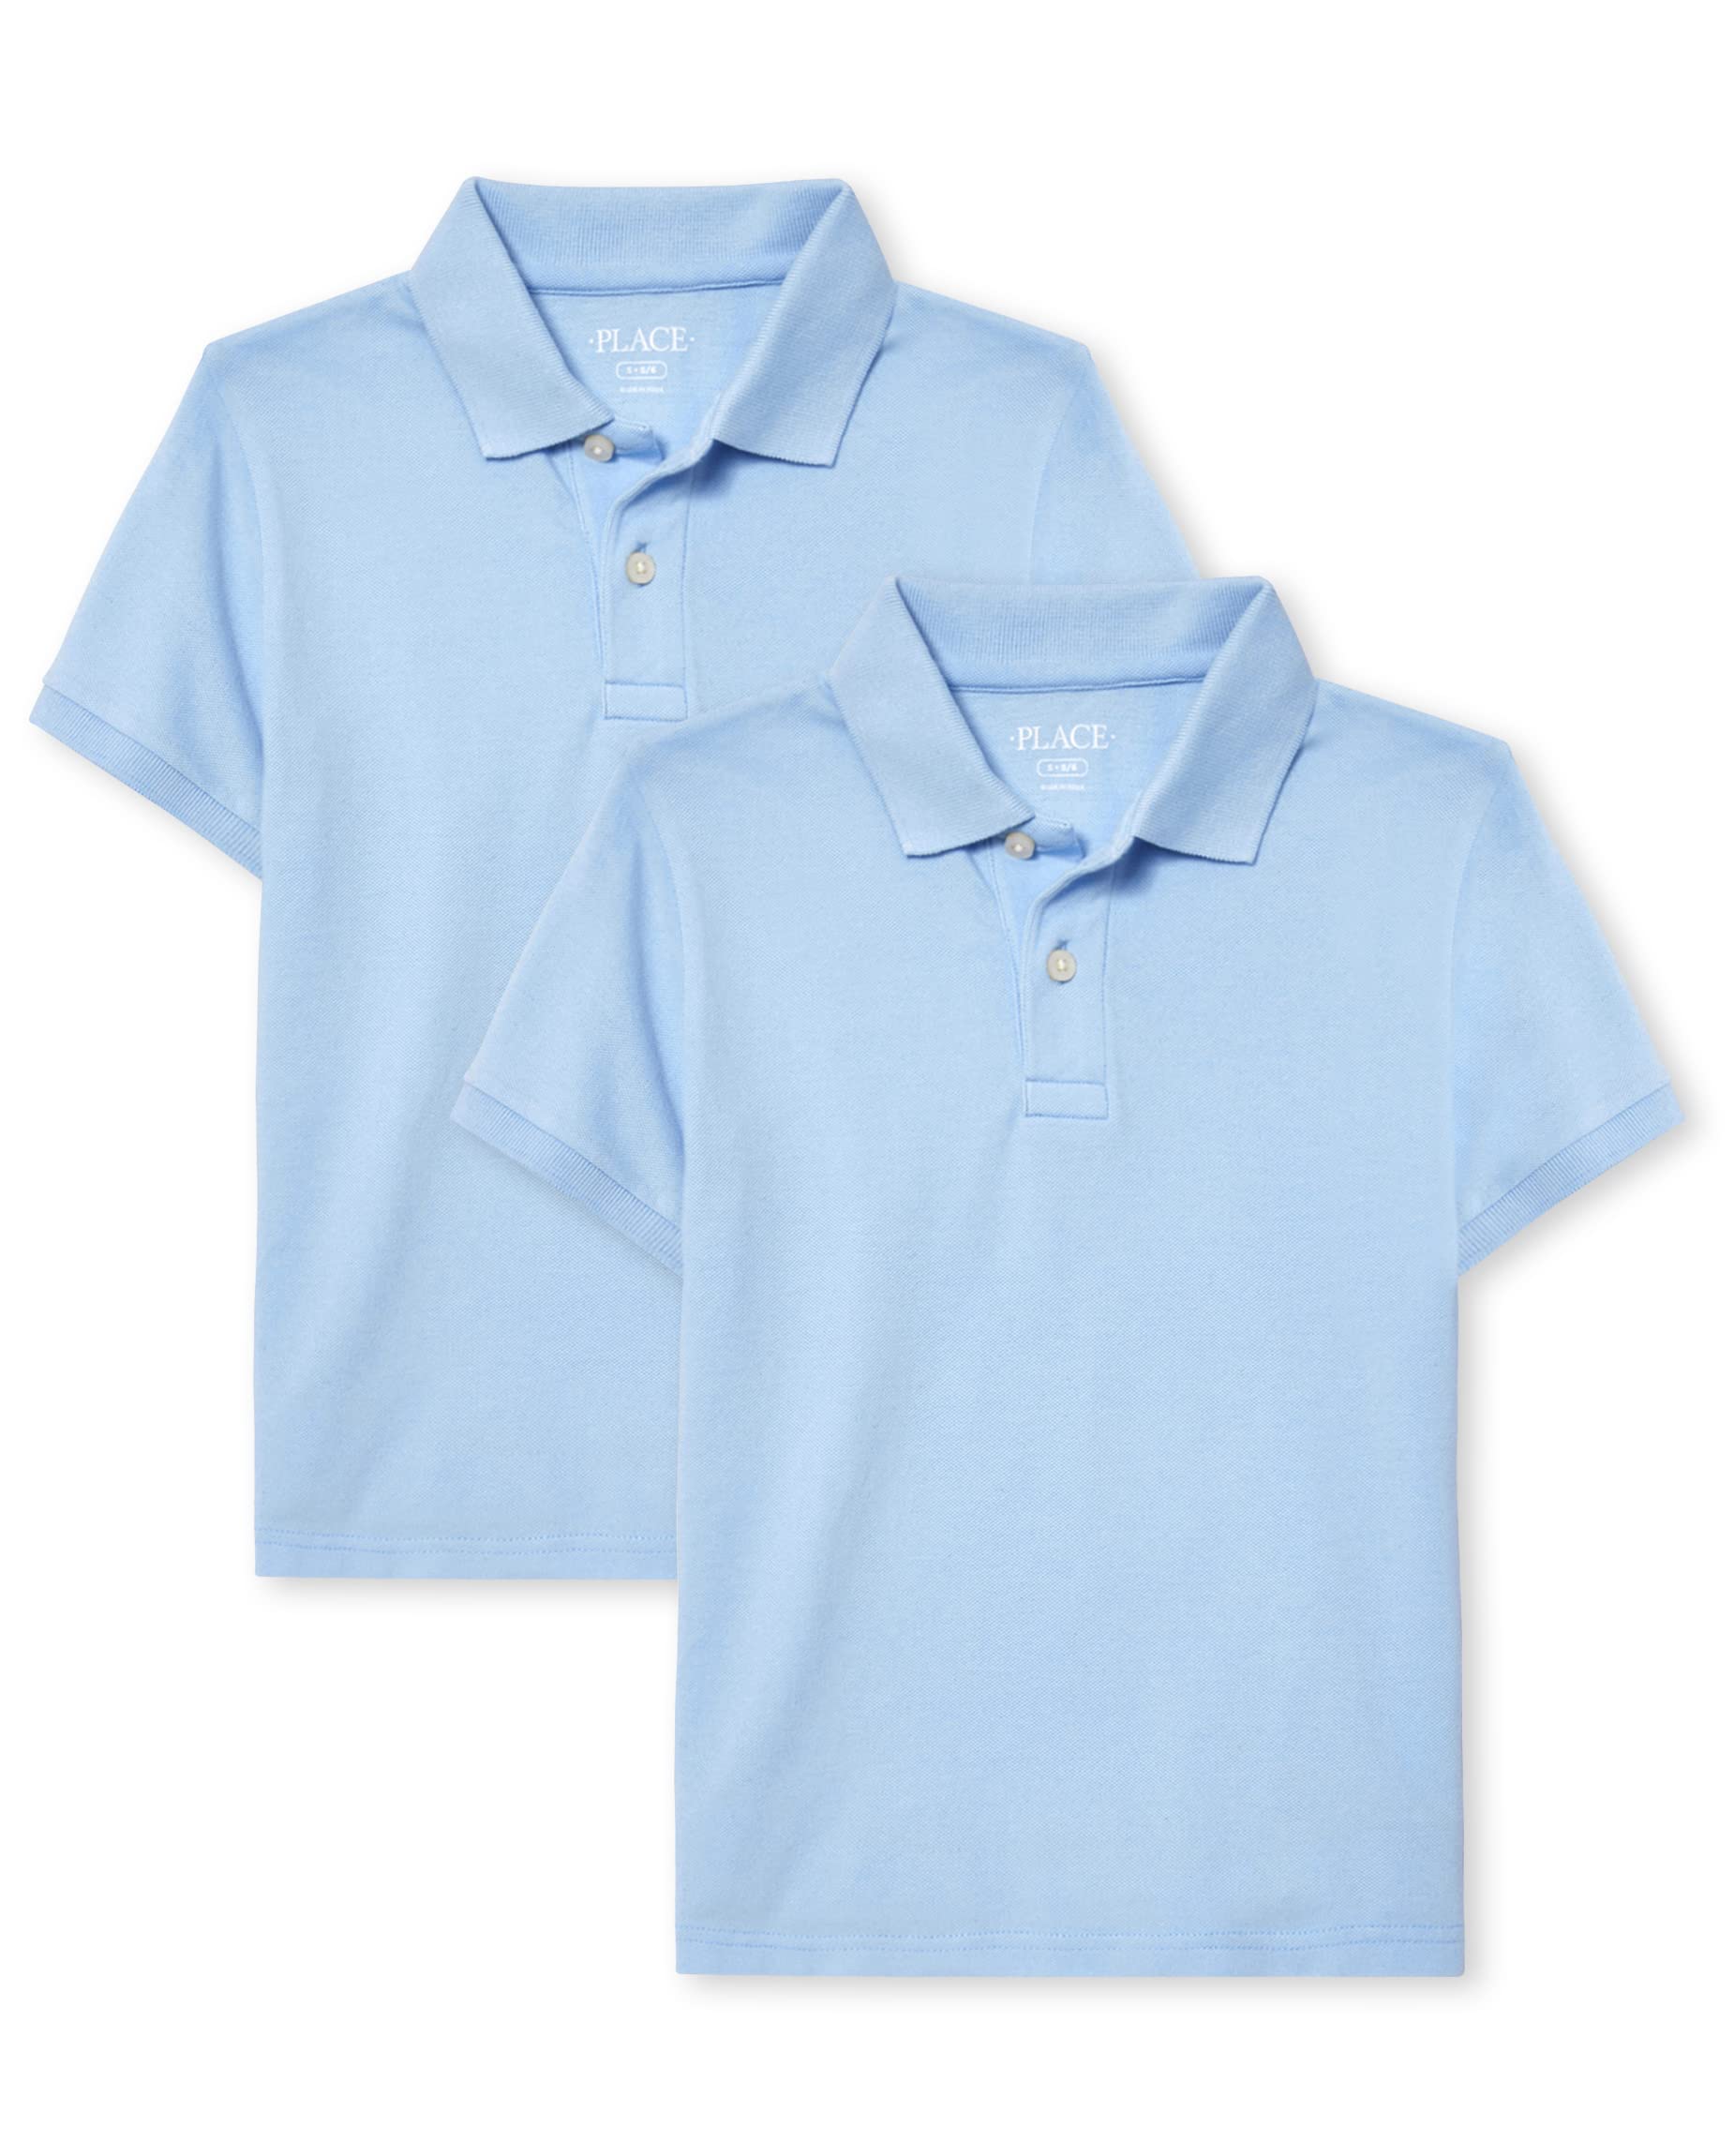 The Children's Place Boys' Short Sleeve Pique Polo 2-Pack